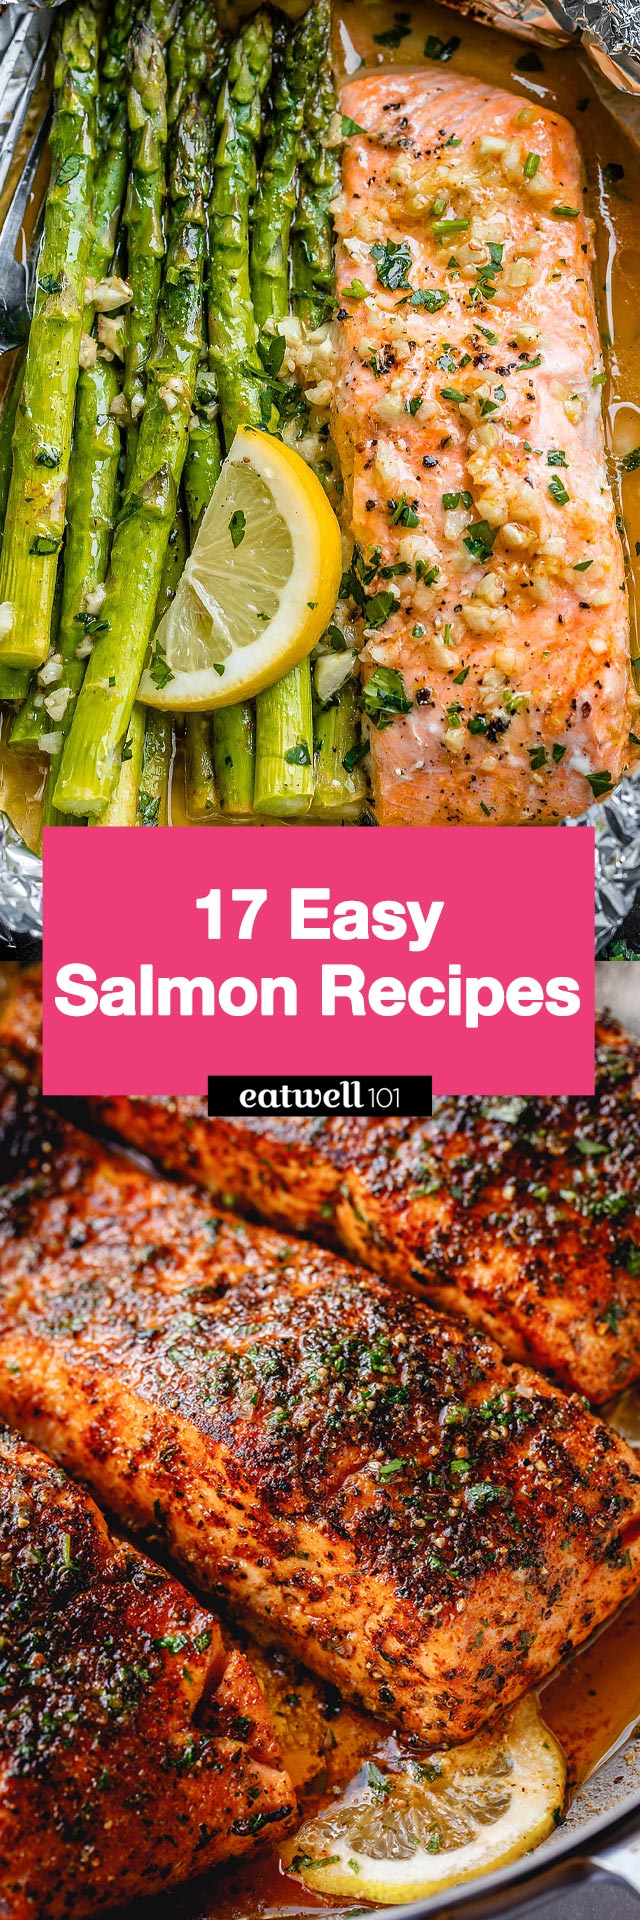 Easy salmon recipes - #salmon #recipes #eatwell101 - With these easy salmon recipes, you can try something new every night of the week!
